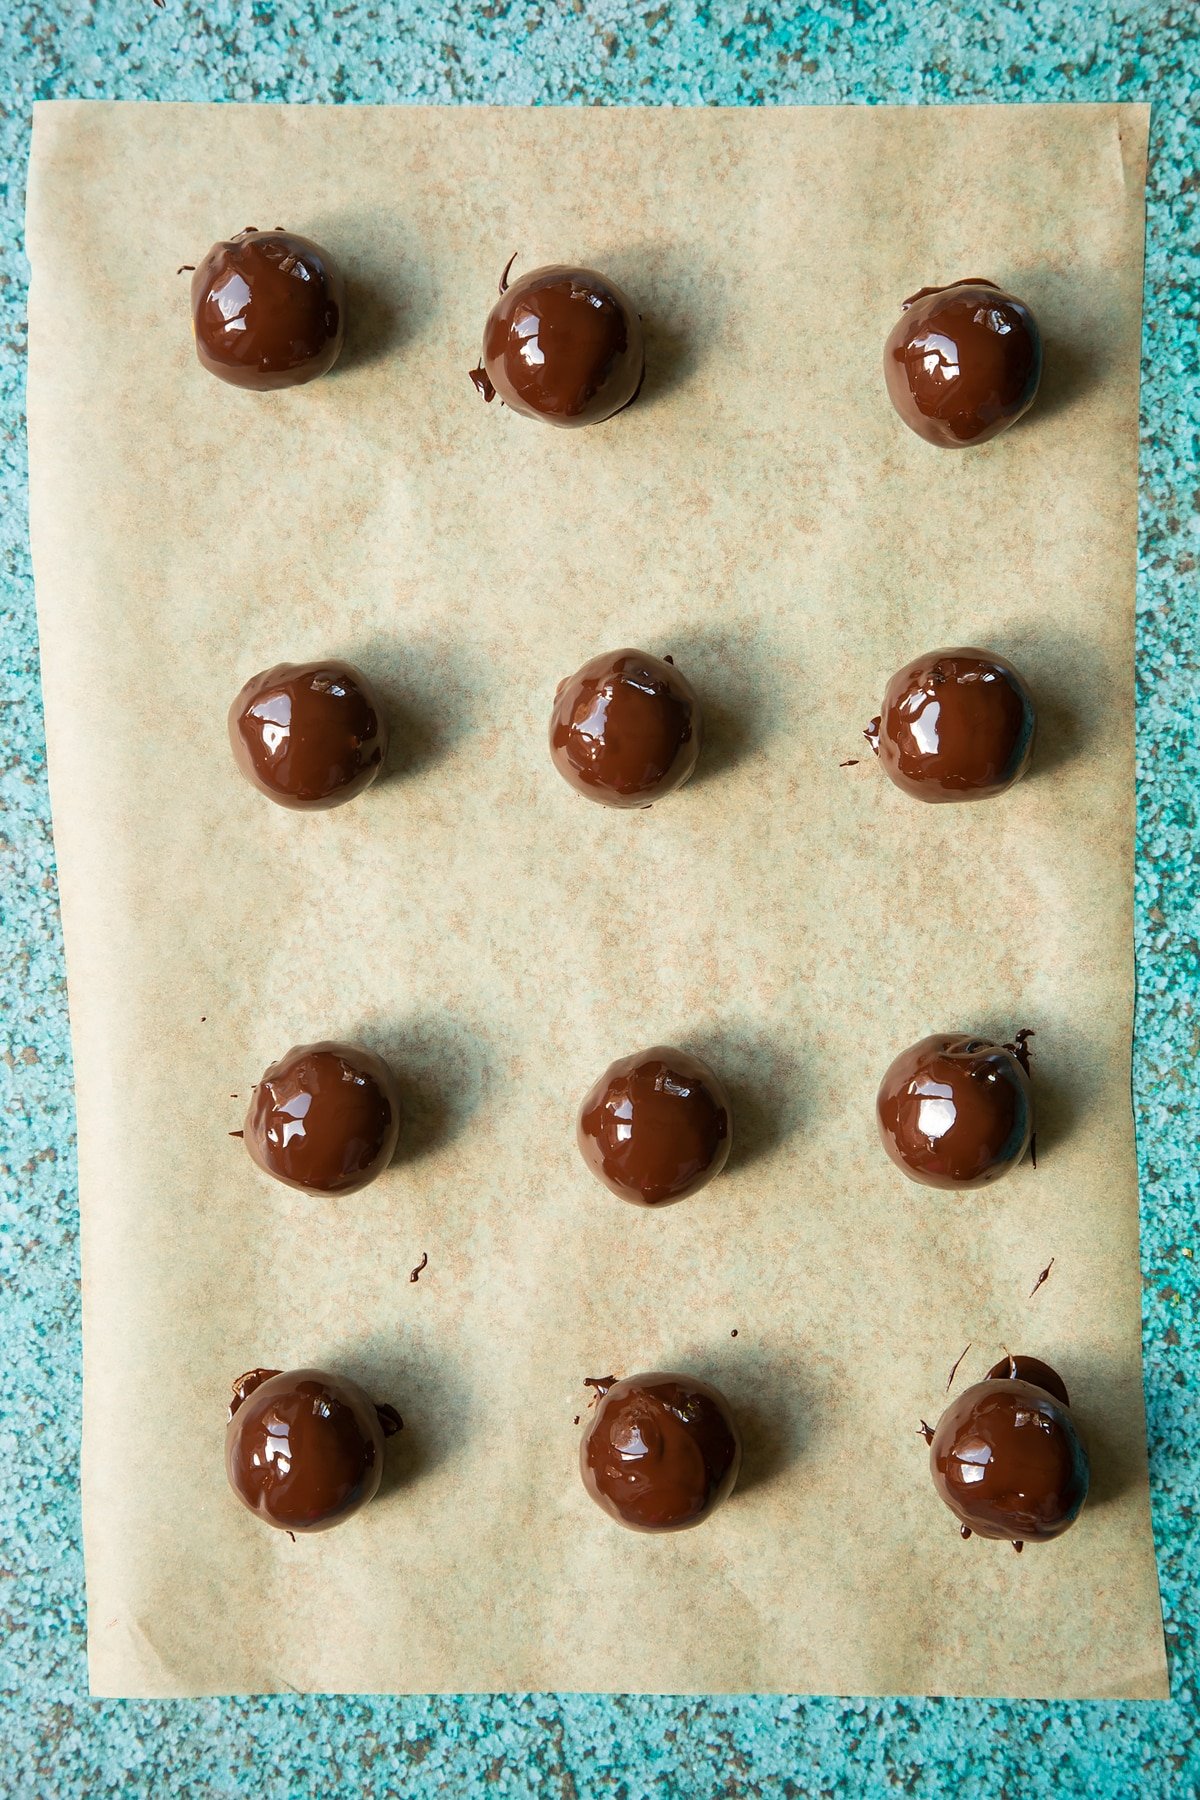 12 apricot balls coated in melted chocolate. The balls are on a piece of baking paper.